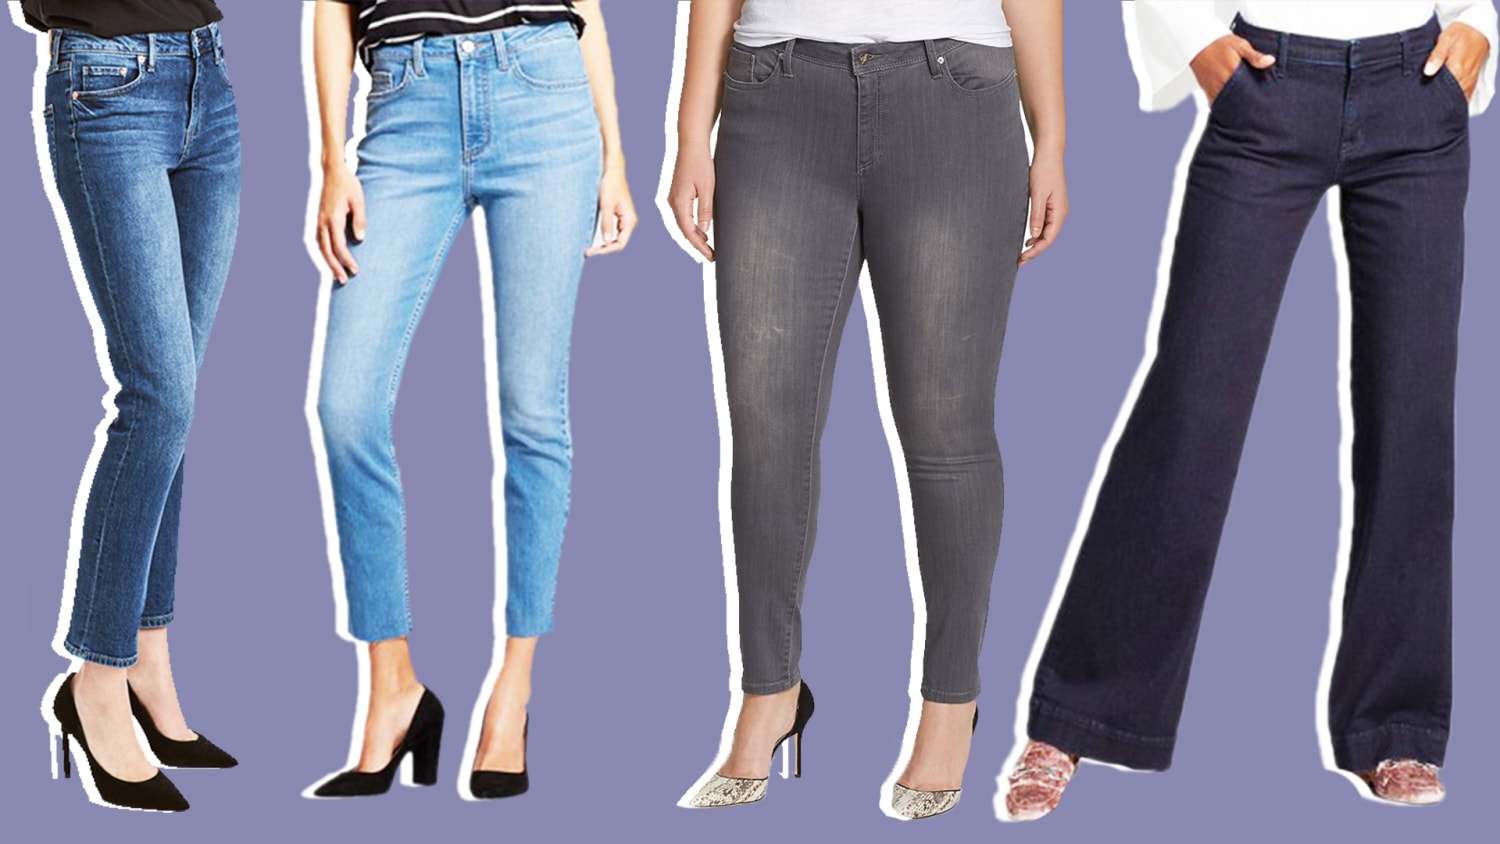 The best places to buy jeans online for less than $50